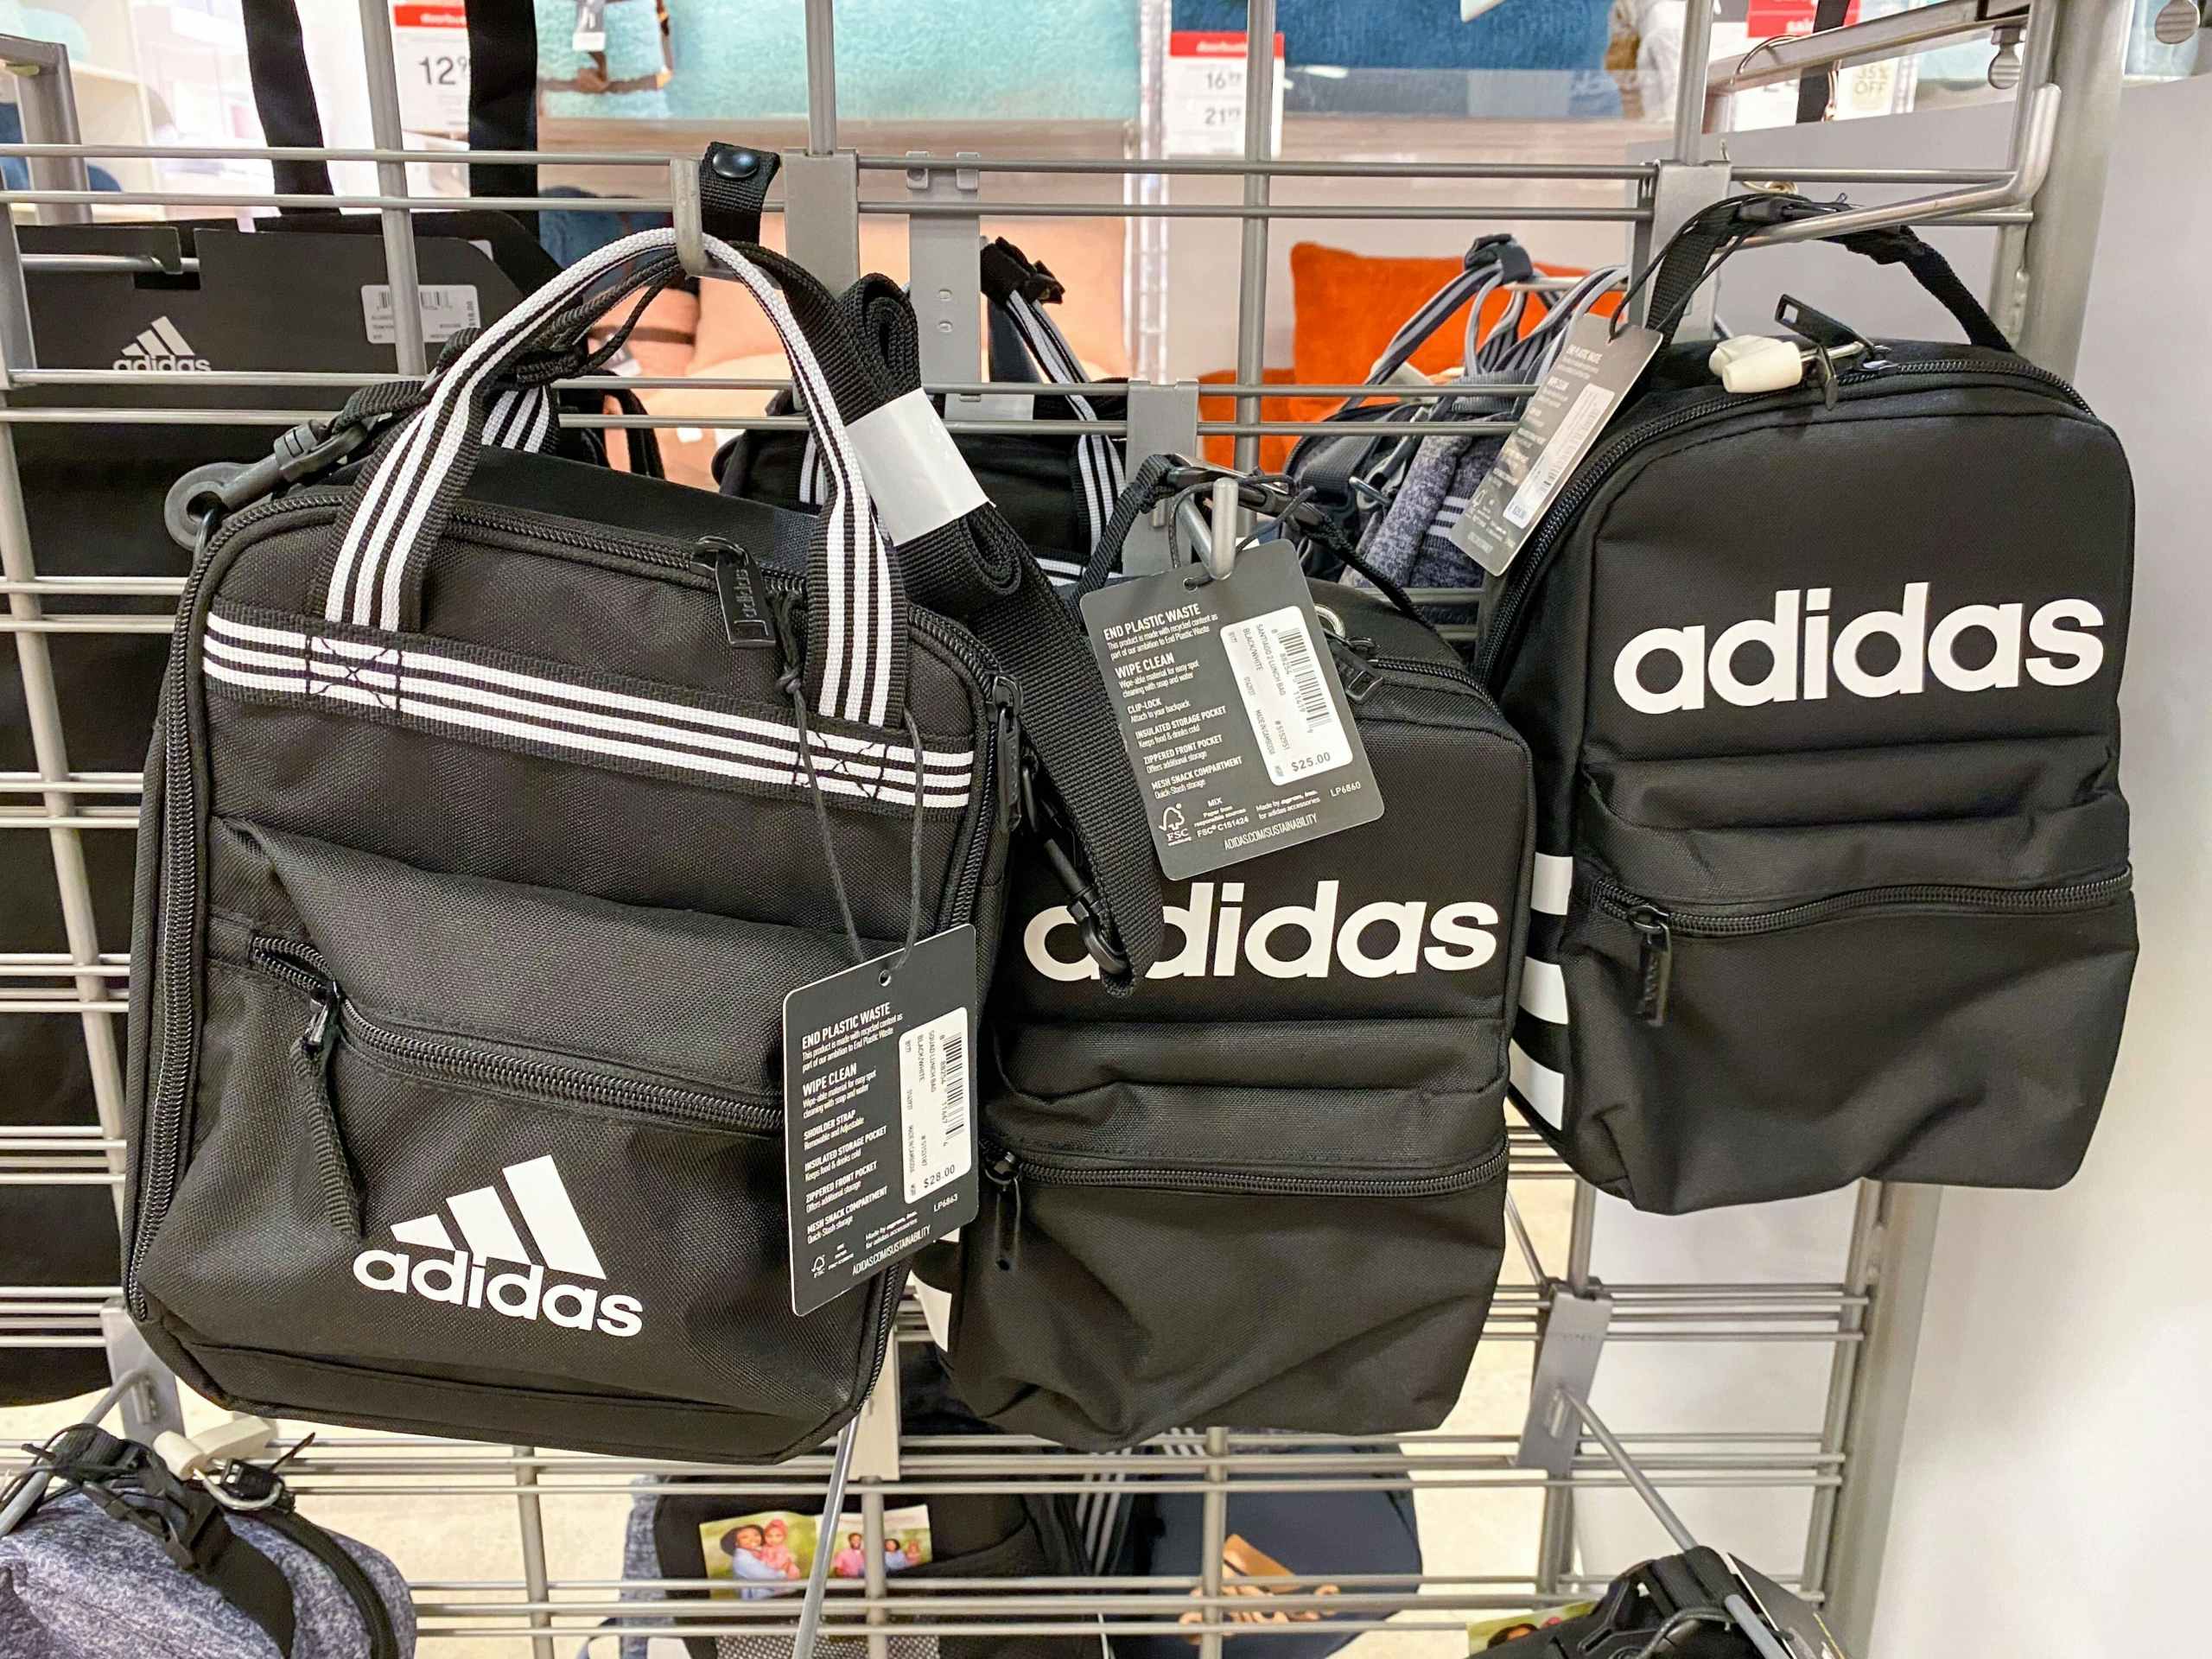 adidas lunchbags on display